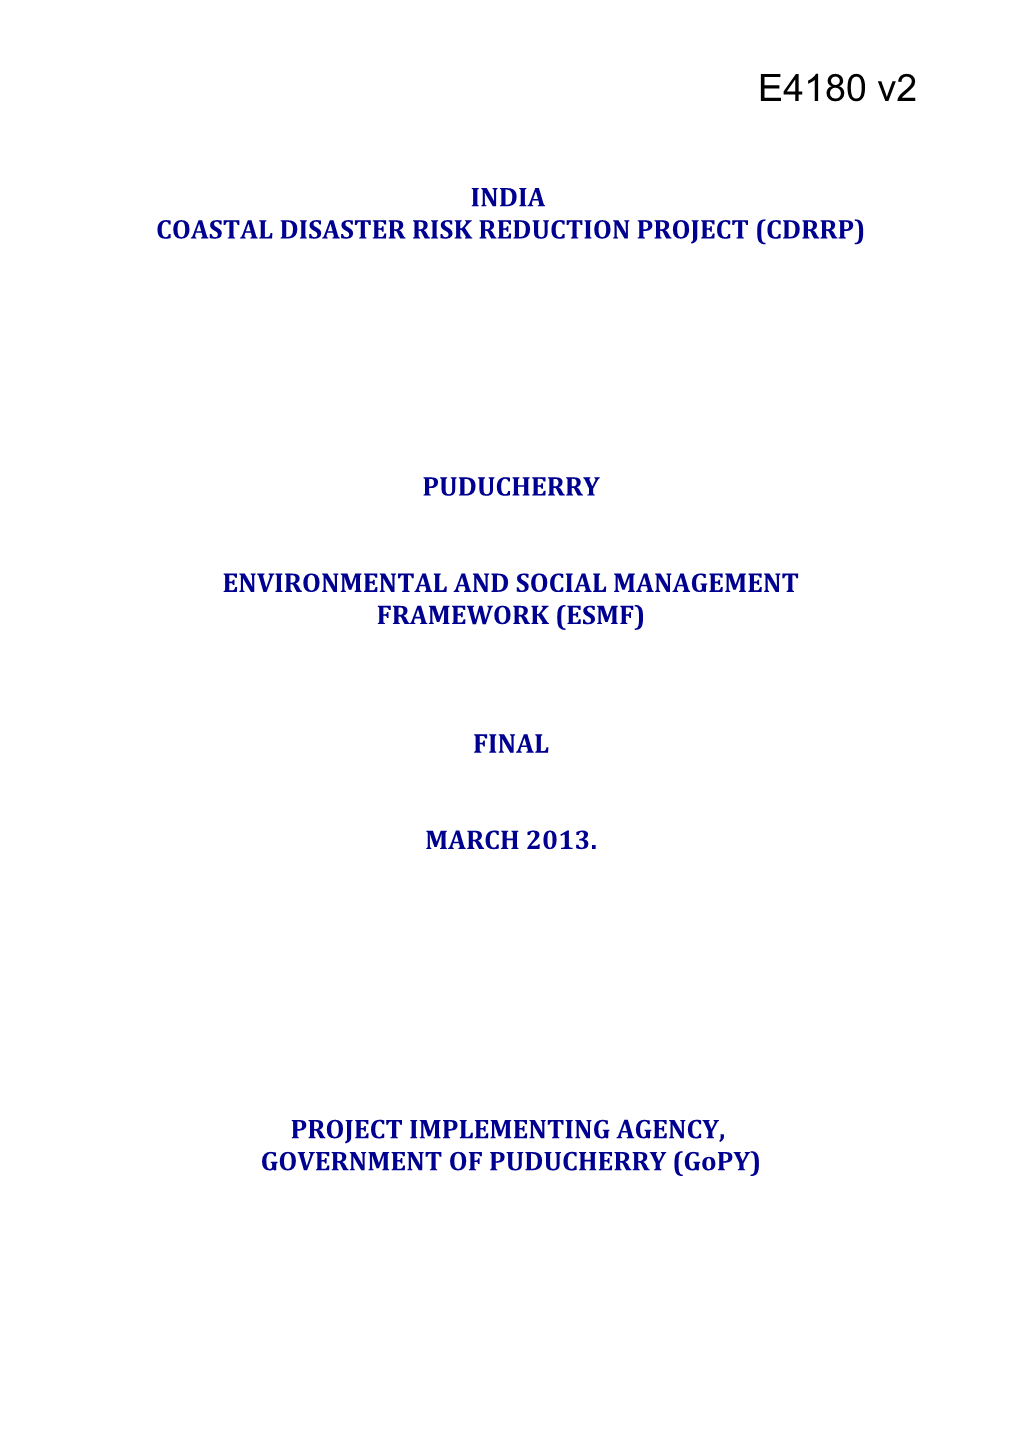 INDIA: Coastal Disaster Risk Reduction Project (CDRRP) - Puducherry